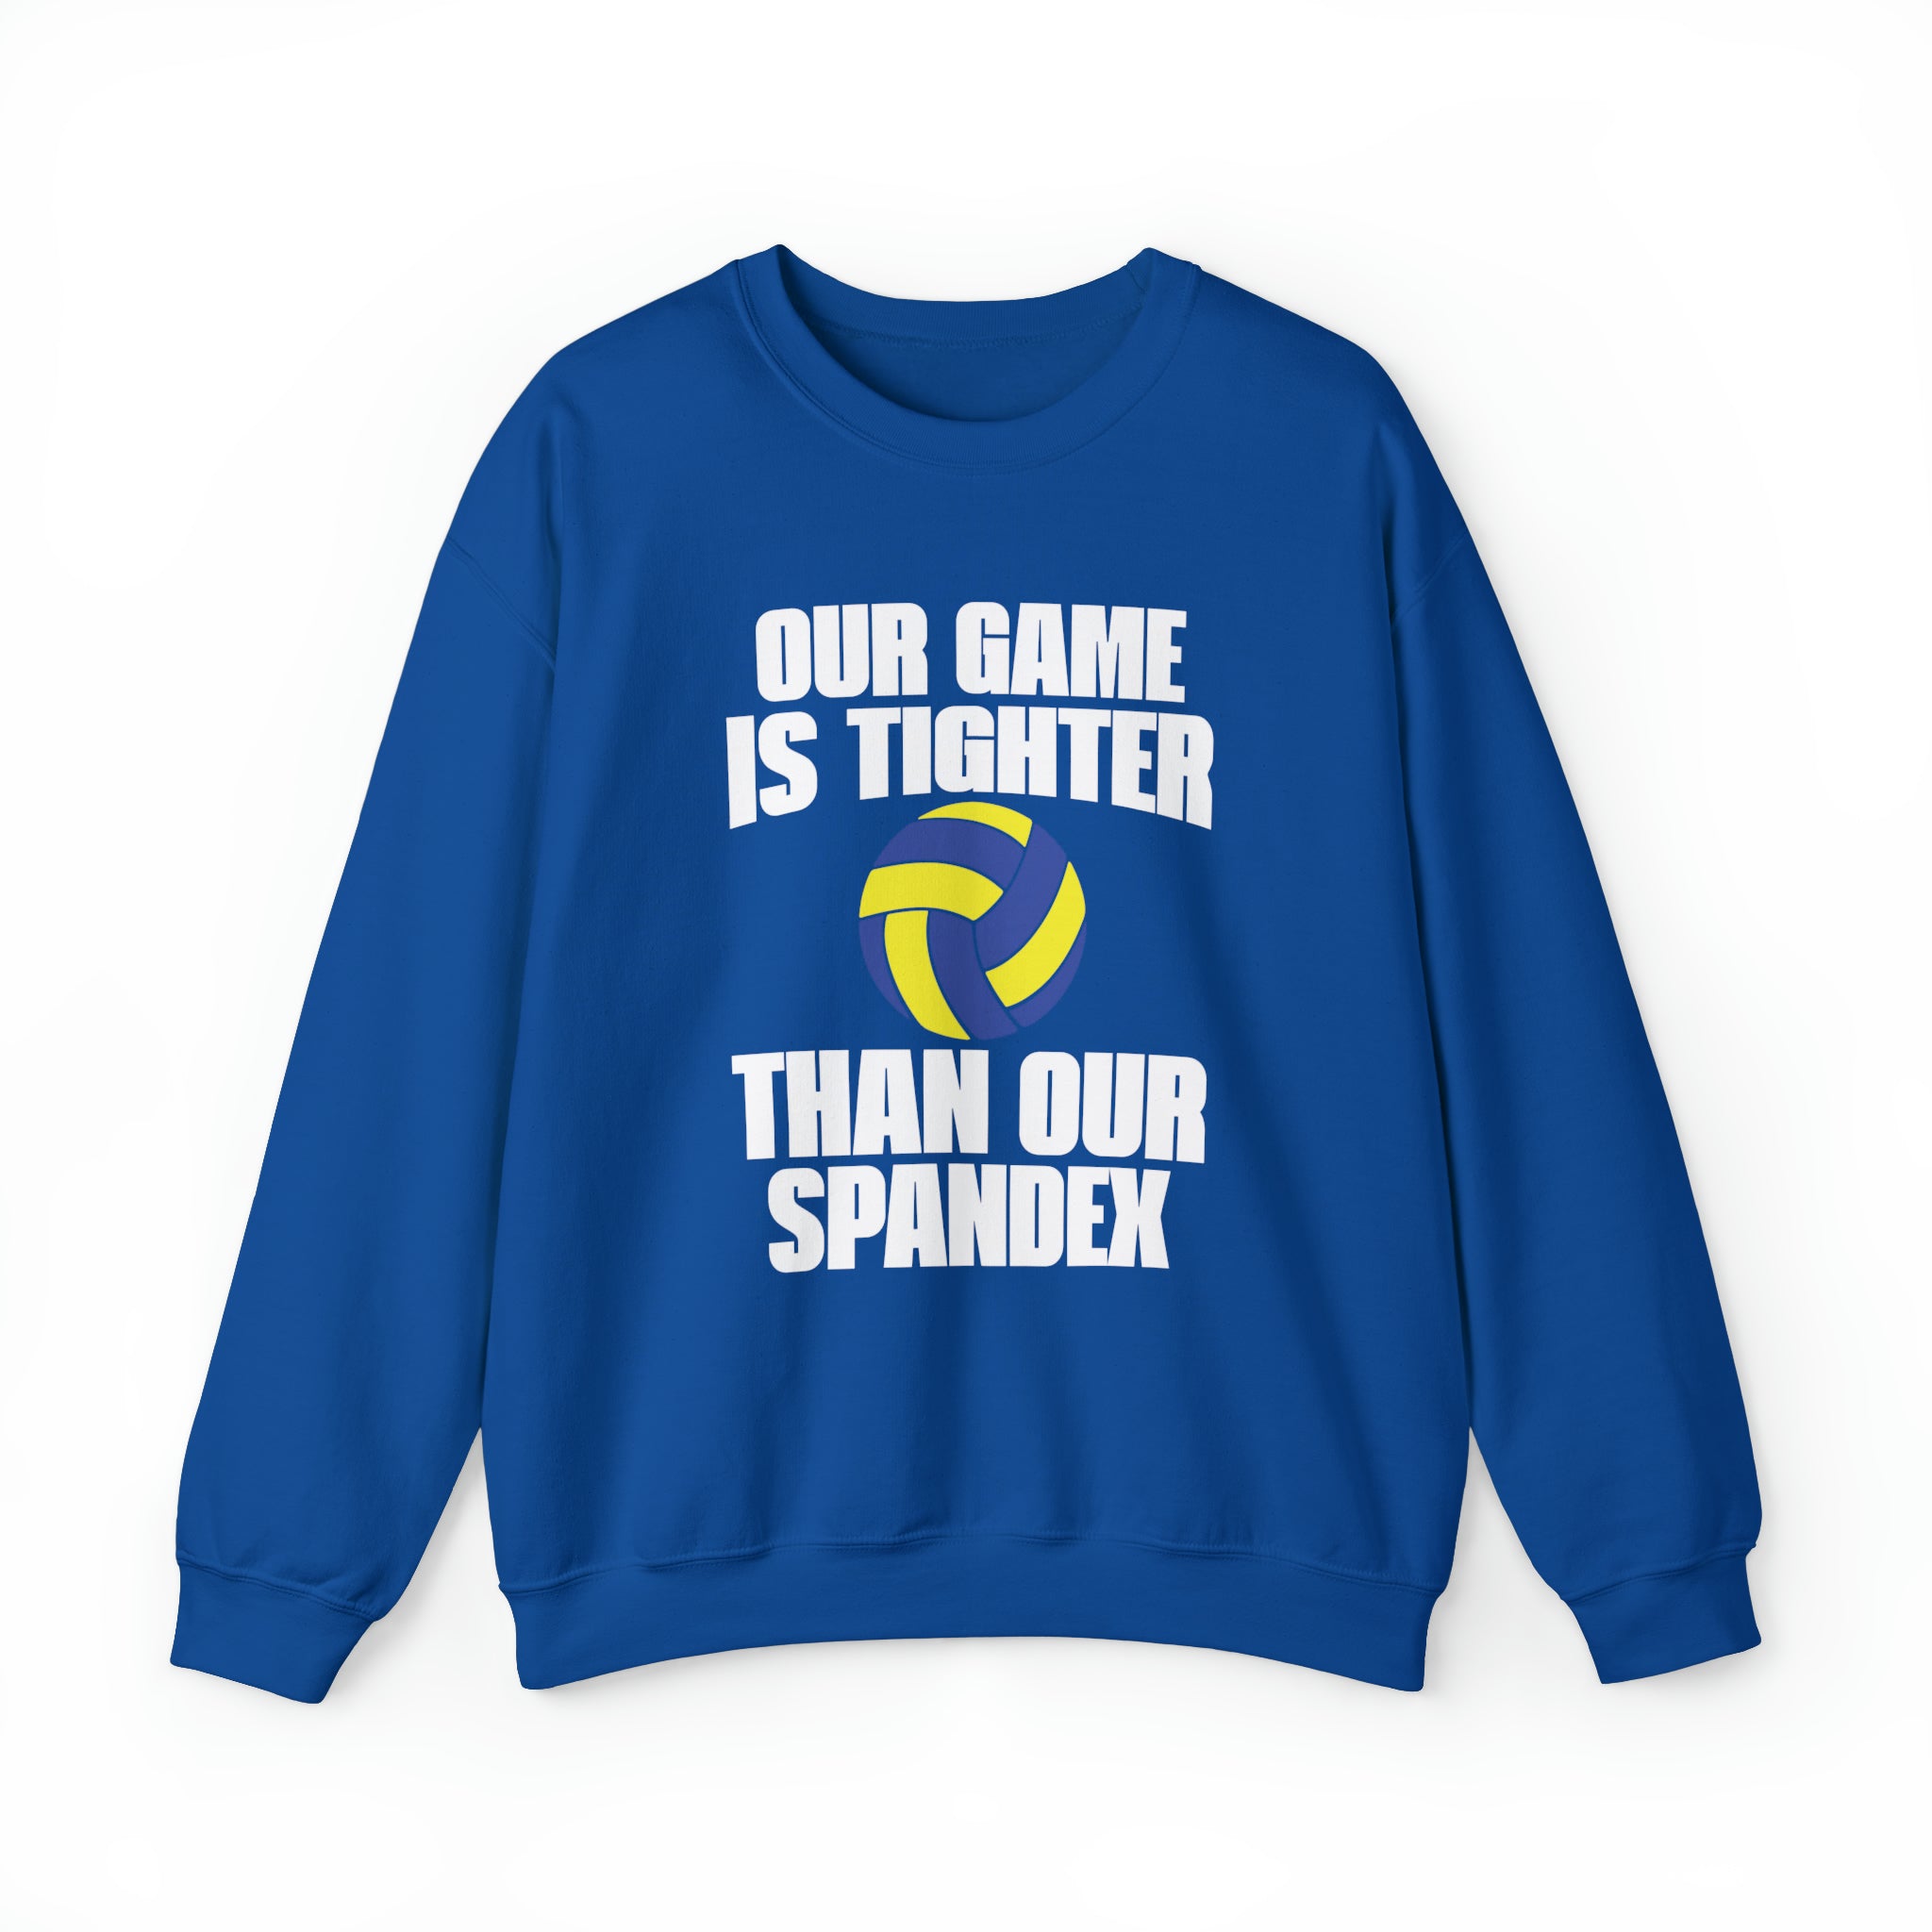 Our Game Is Tighter Than our Spandex Sweatshirt